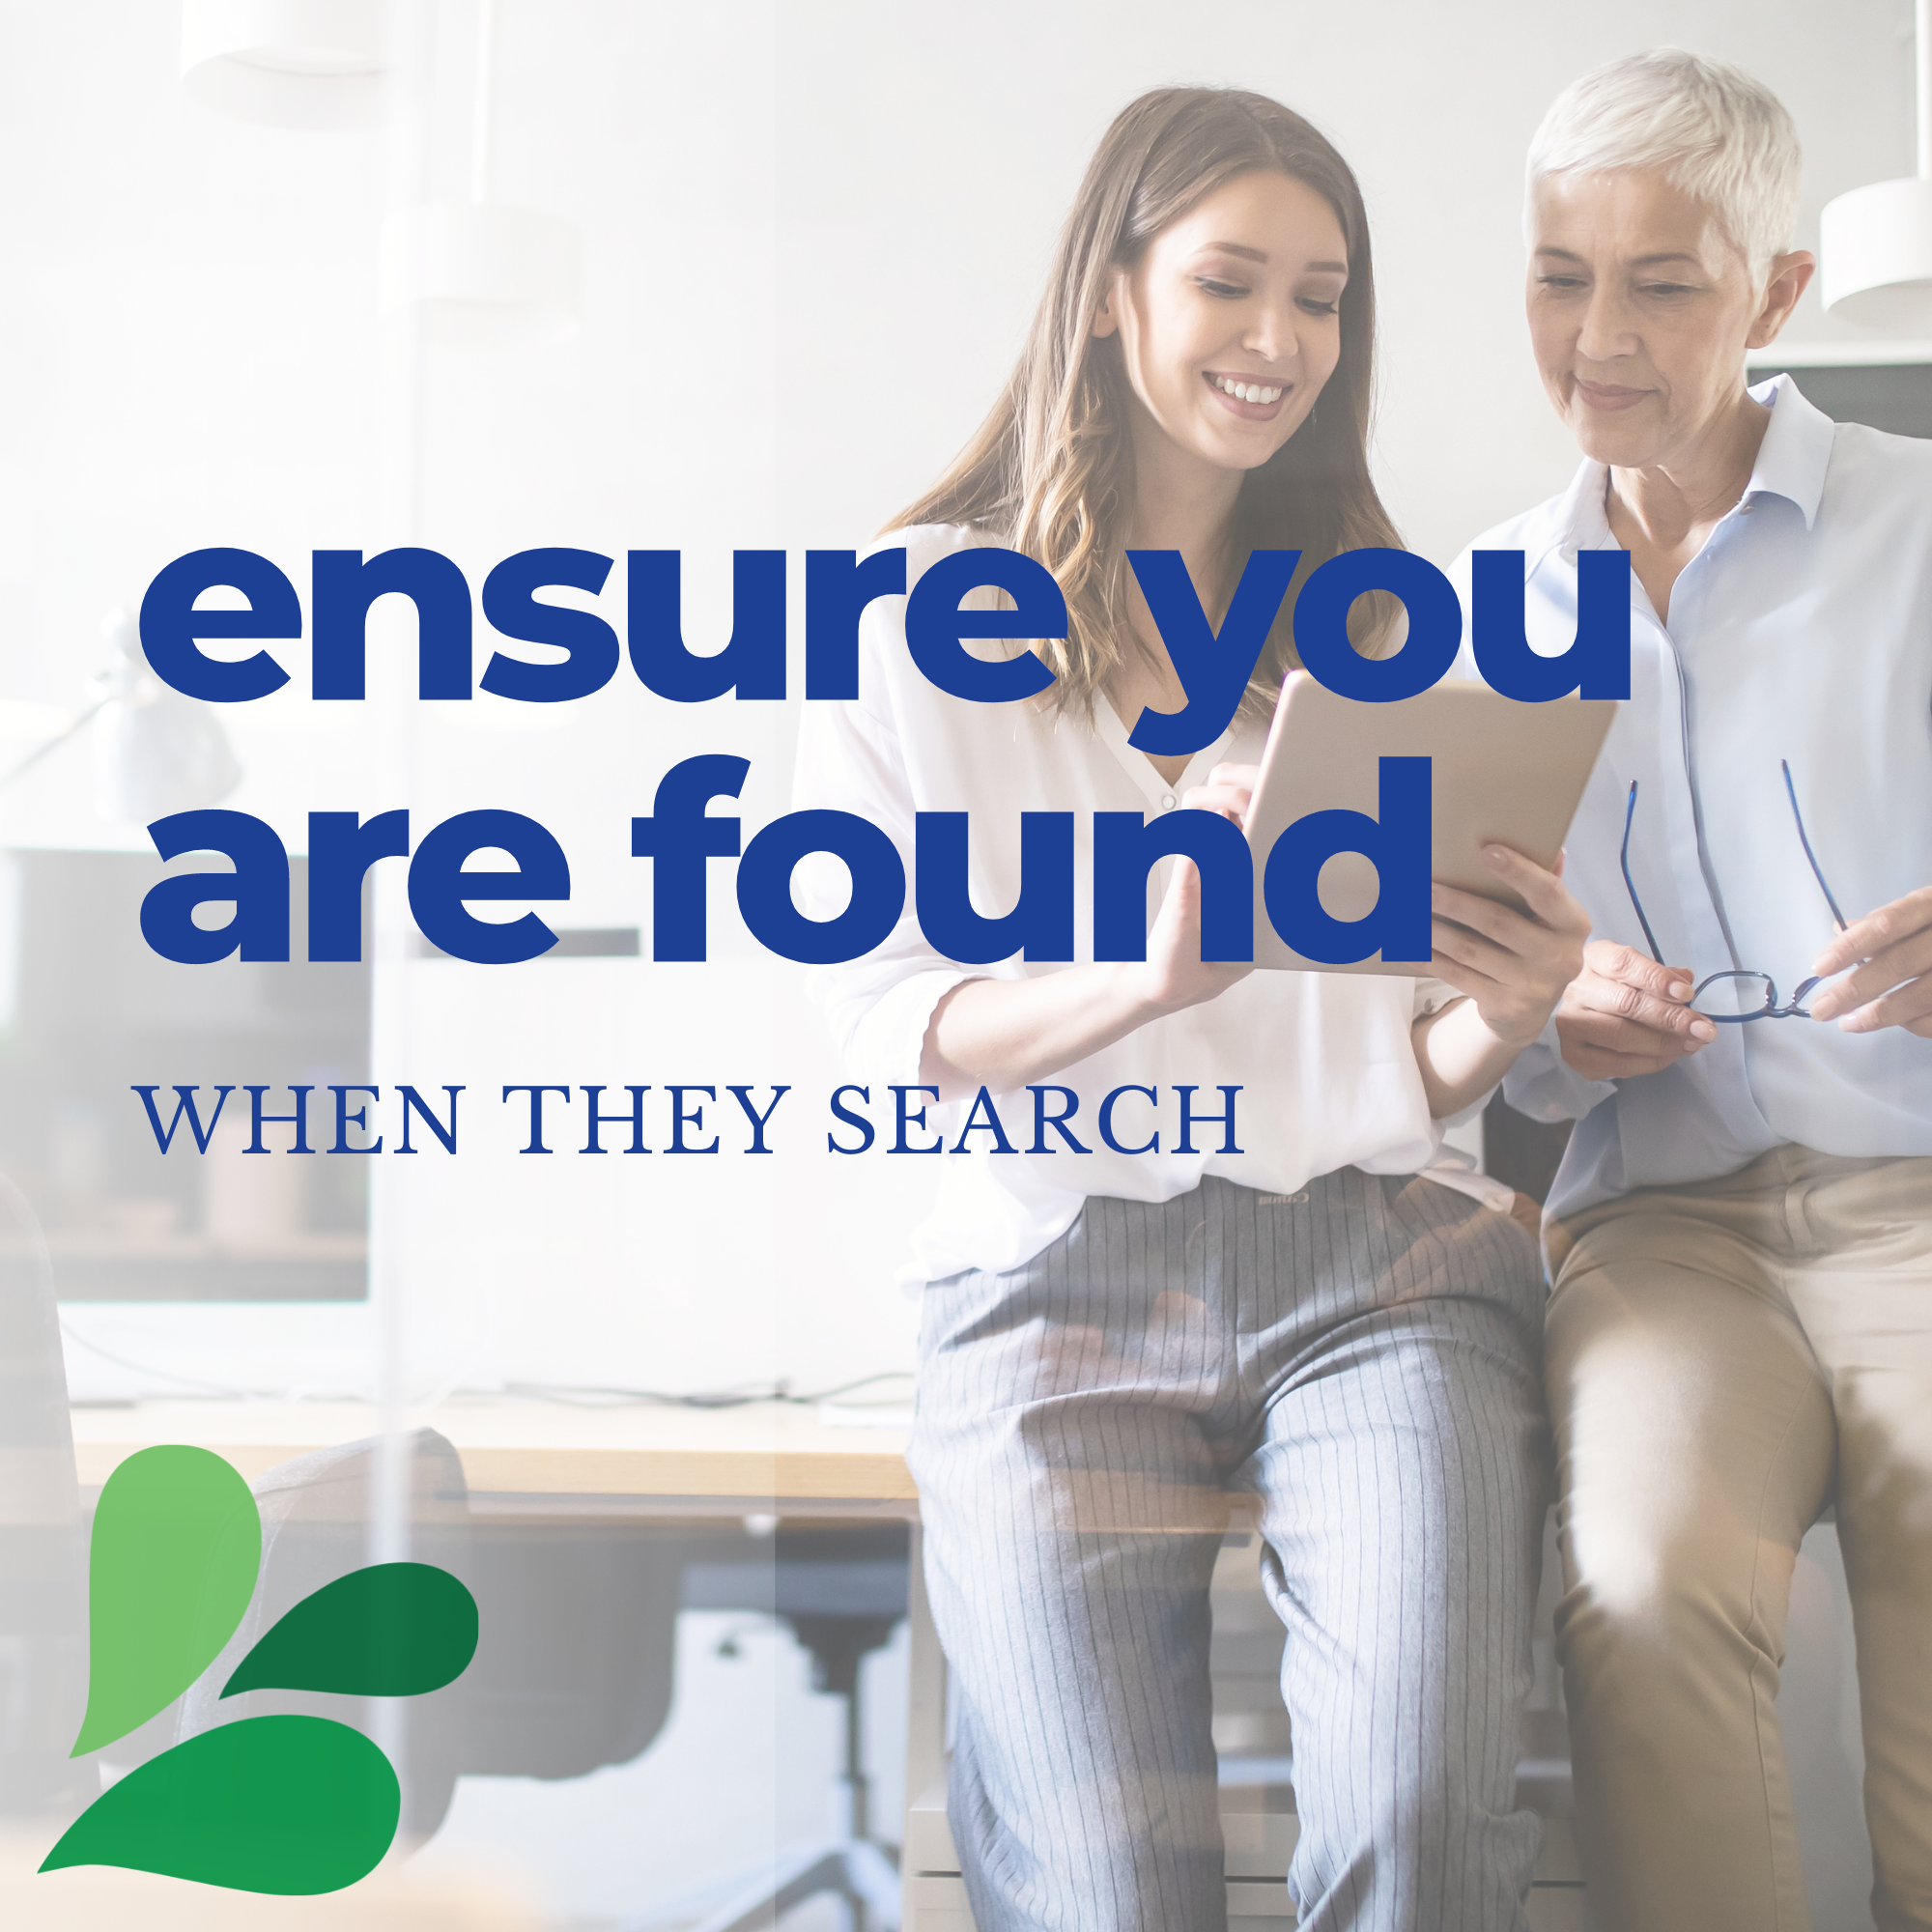 two women looking at a tablet with the overlay text of ensure you are found when they search and Robb Digital logo